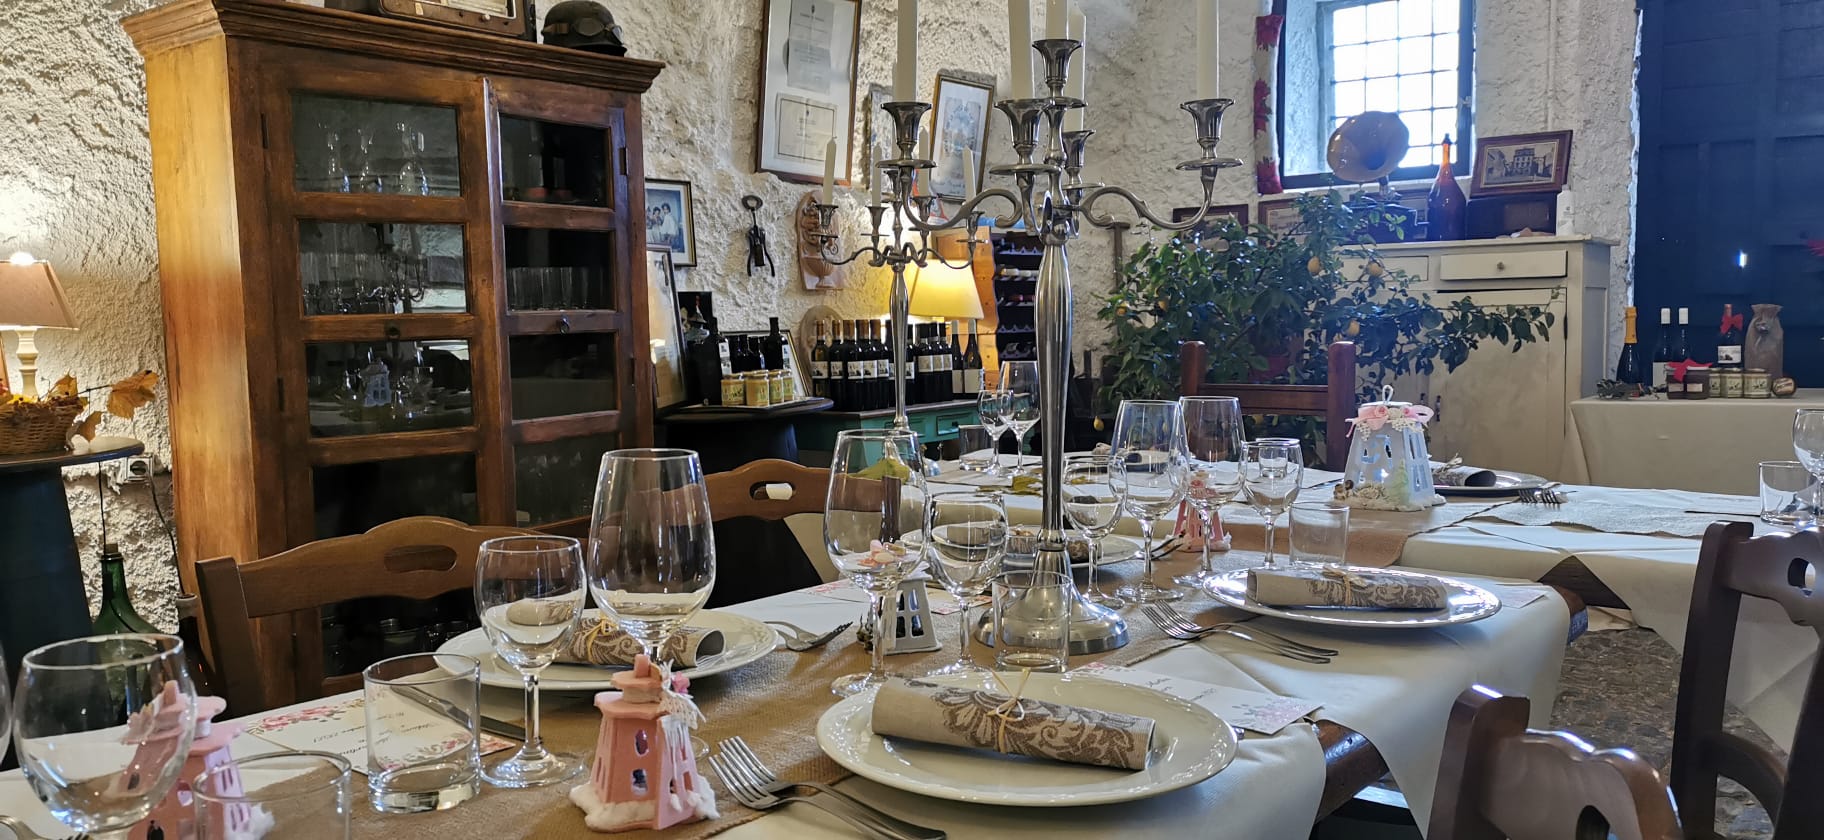 Events at the Minardi Winery in Frascati (16)